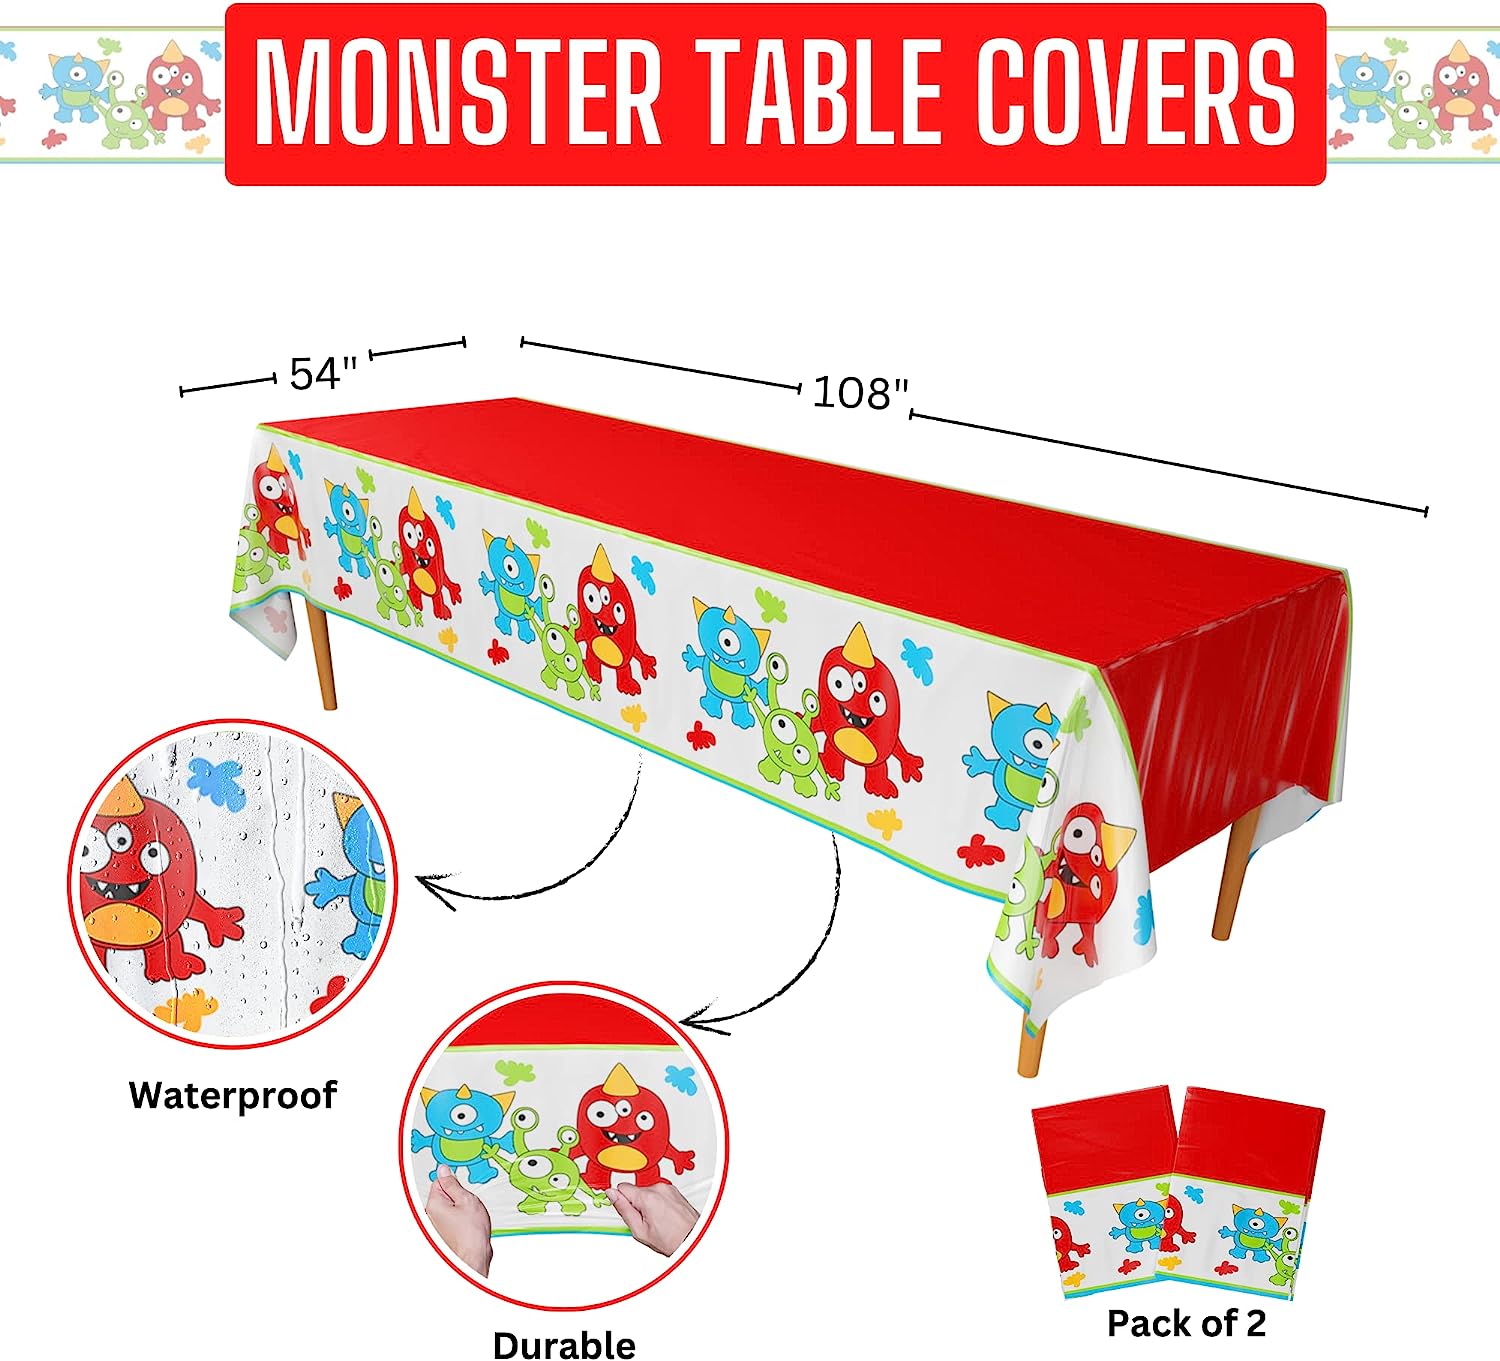 Waterproof and Durable Monster Party Table Covers (Pack of 2) - 54"x108" XL - Monster Party Supplies, Monster Birthday Party, Monster Themed 1st Birthday, Kids Monster Birthday, Monster Party Decorations